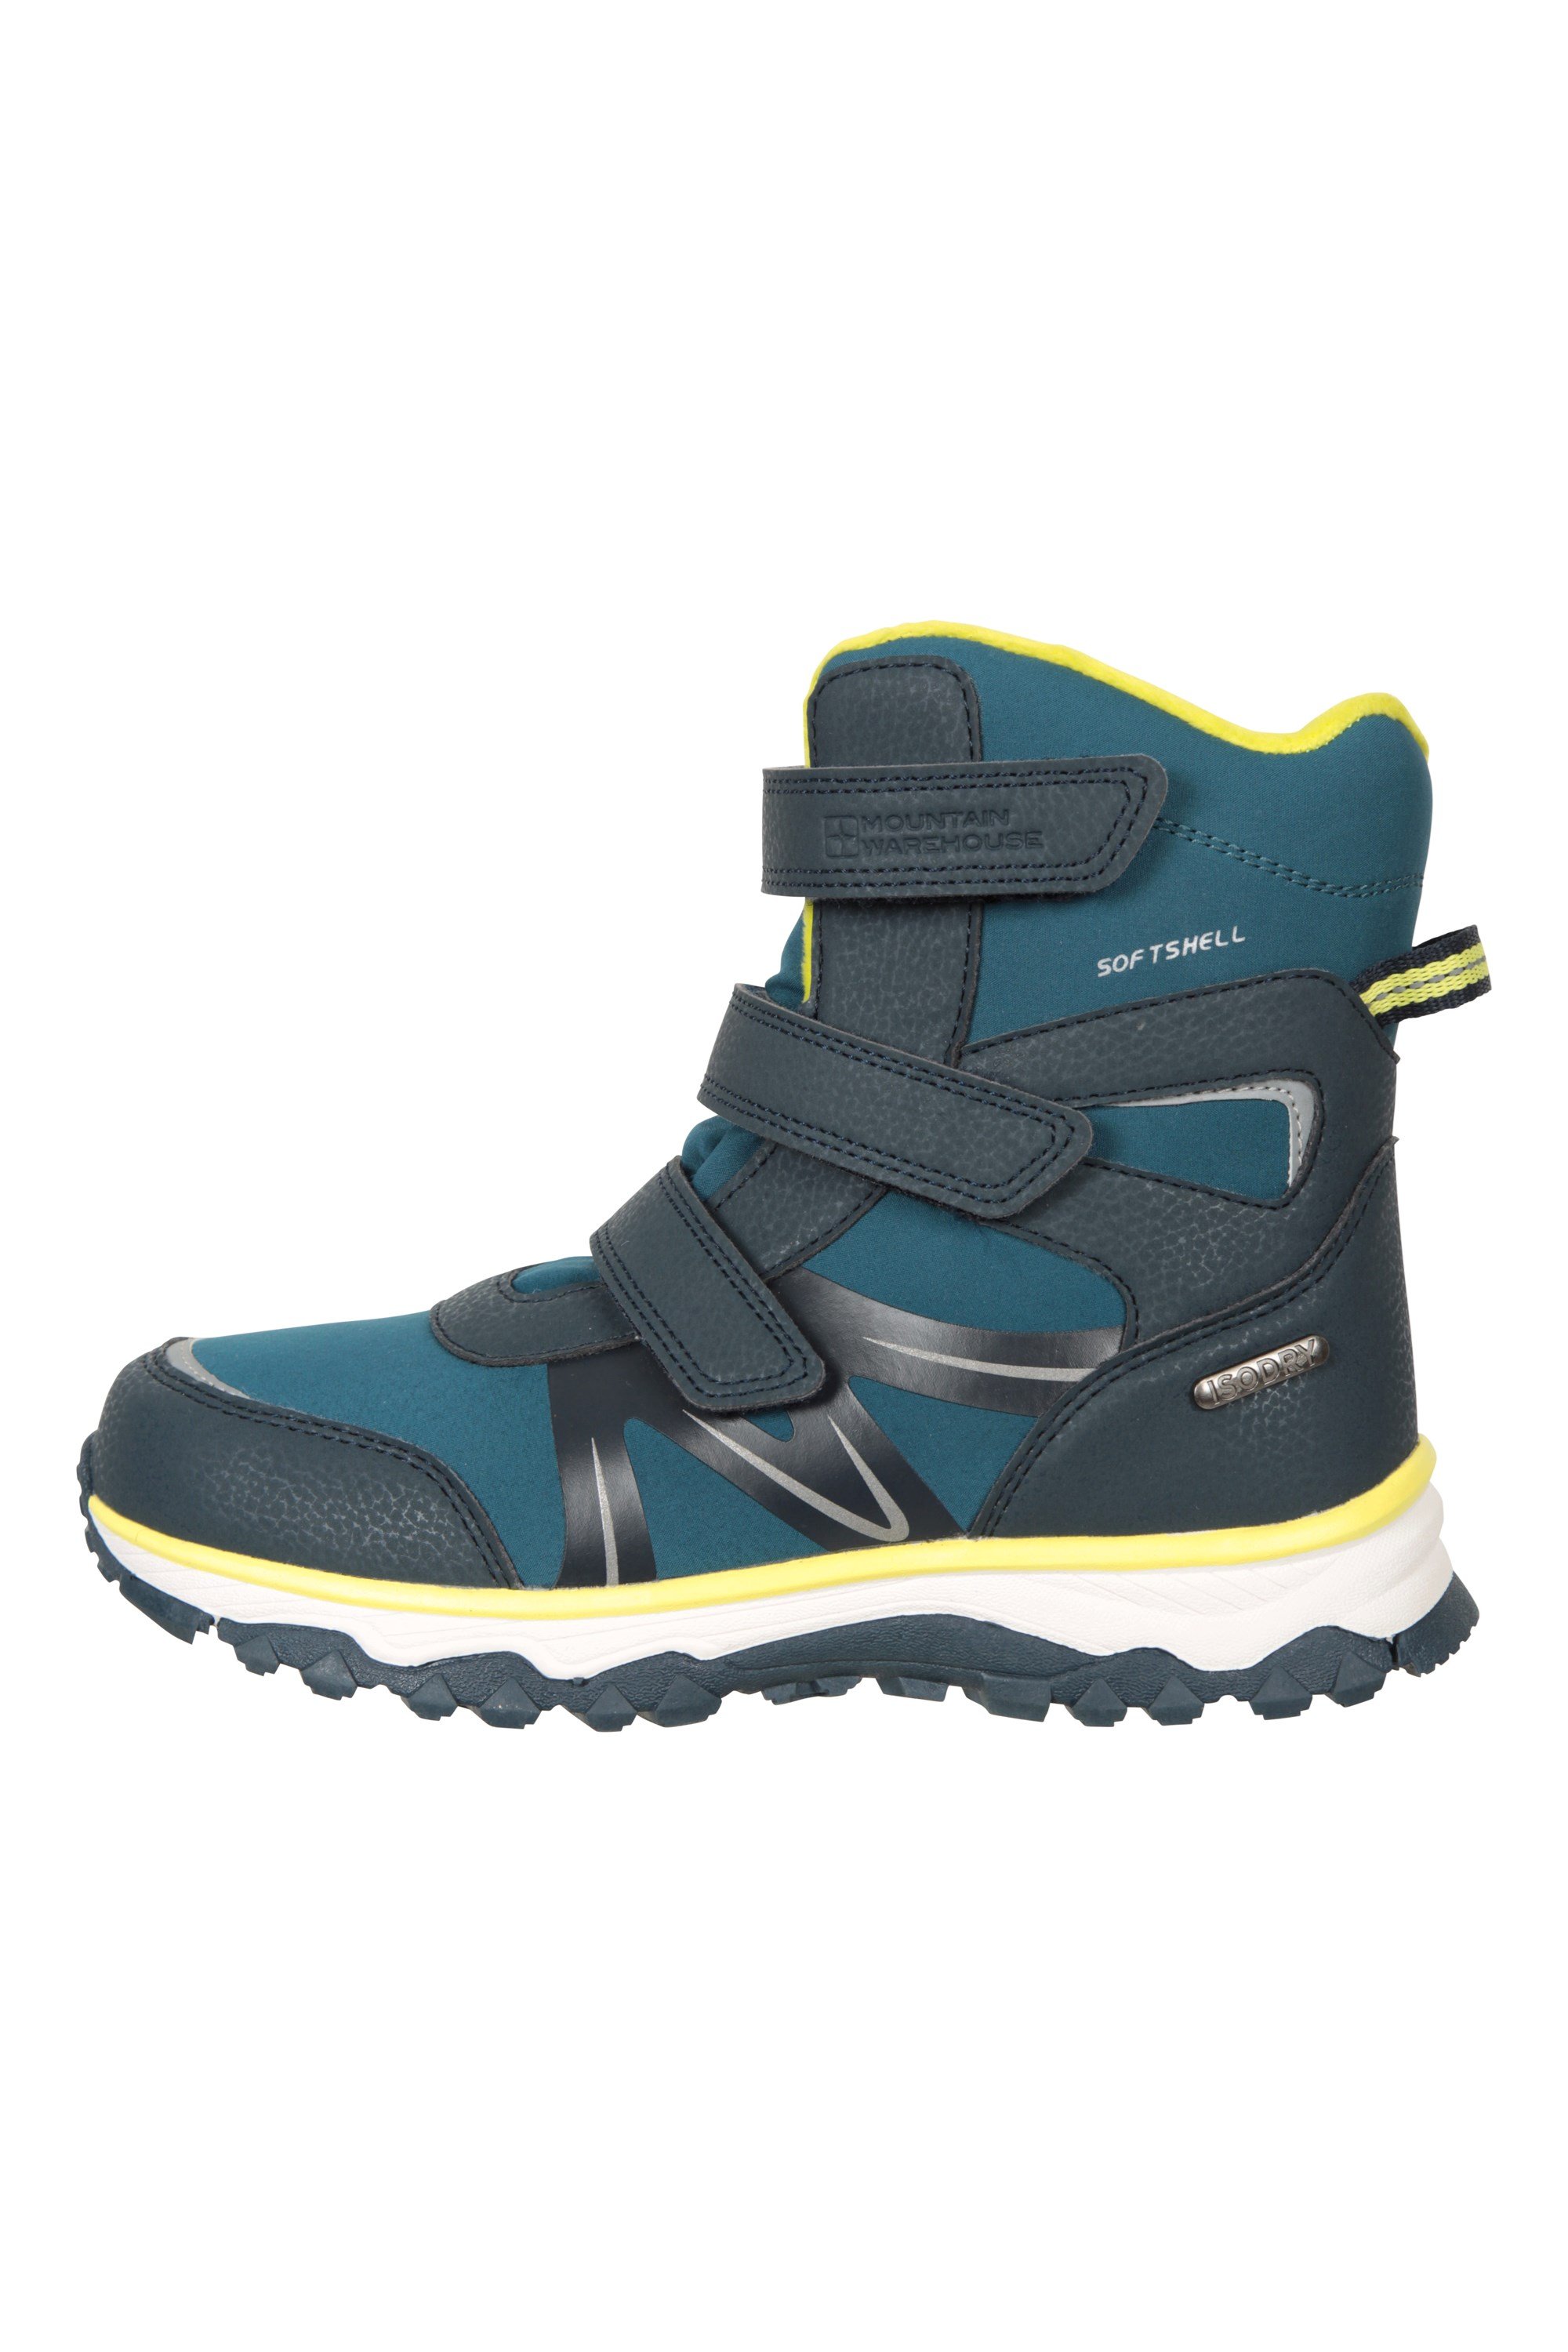 to uger prins binde Slope Kids Softshell Adaptive Snow Boots | Mountain Warehouse US